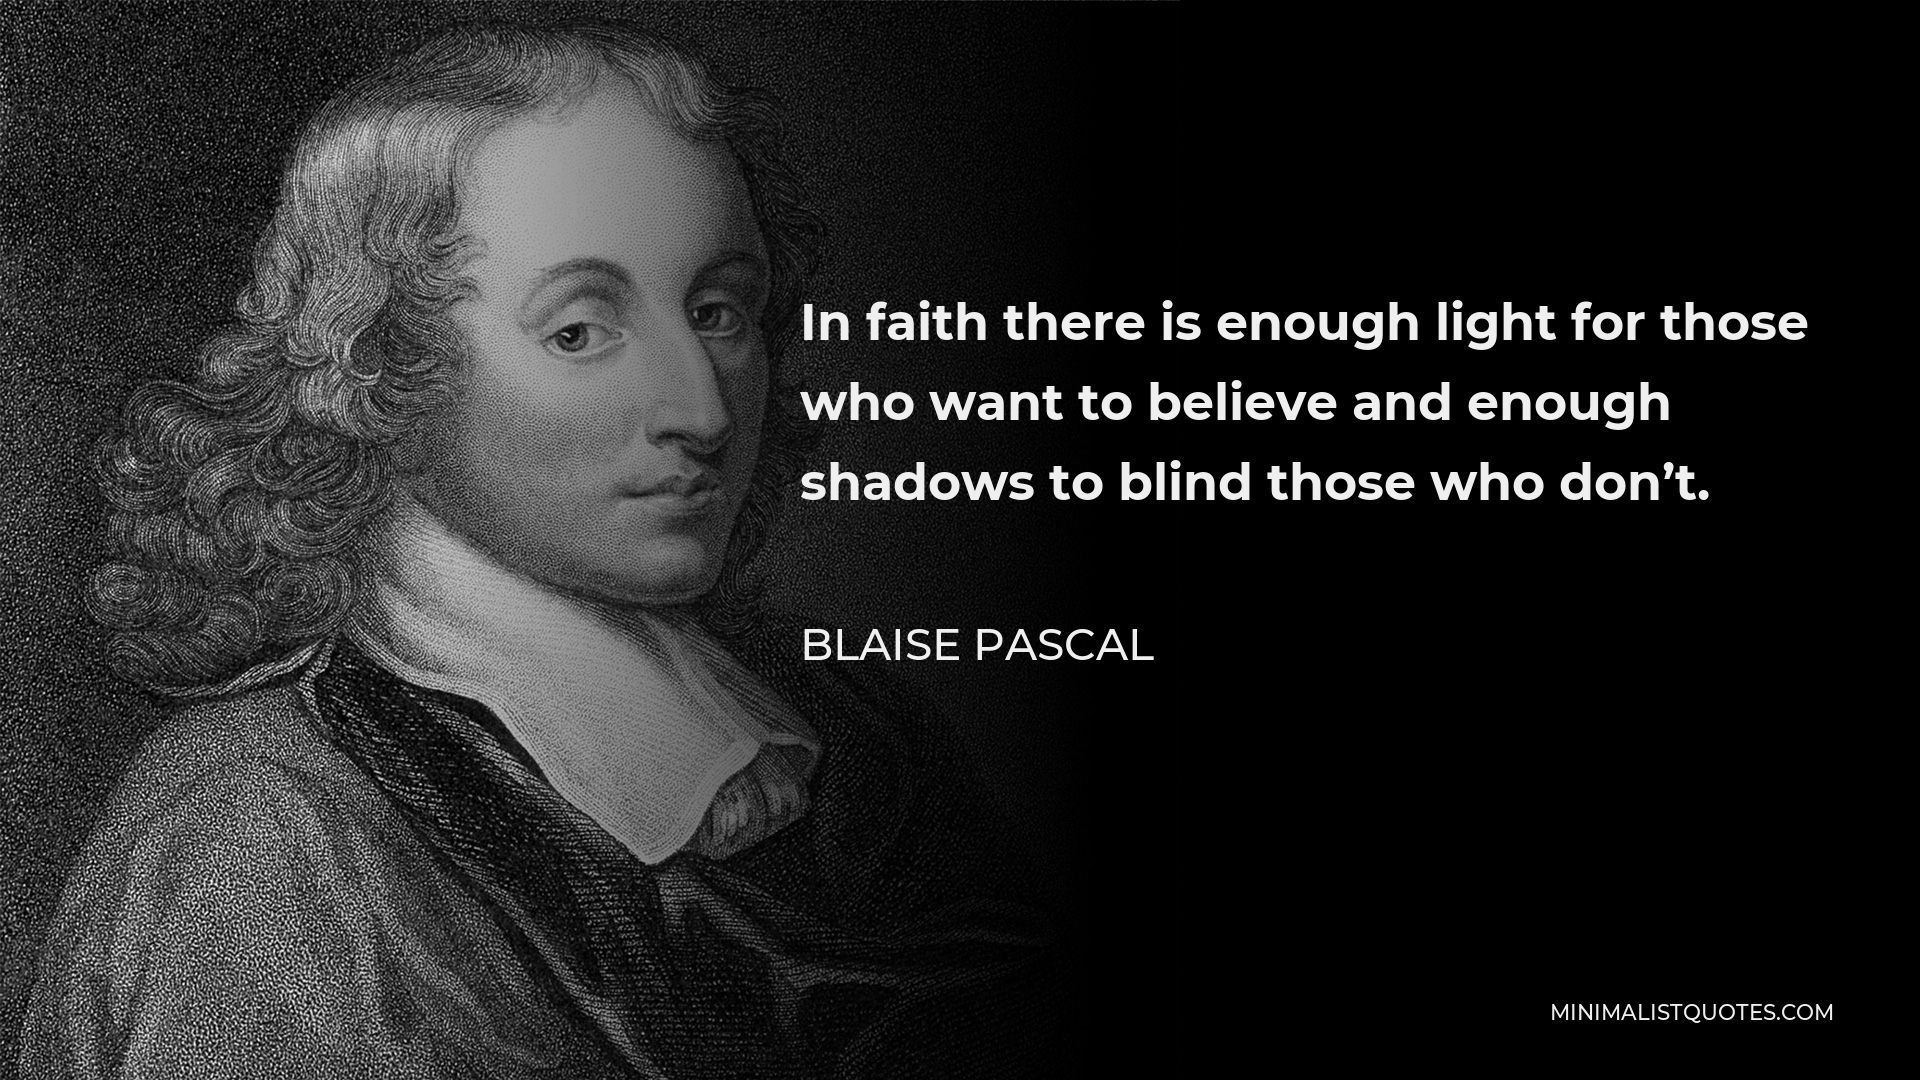 Blaise Pascal Quote - In faith there is enough light for those who want to believe and enough shadows to blind those who don’t.